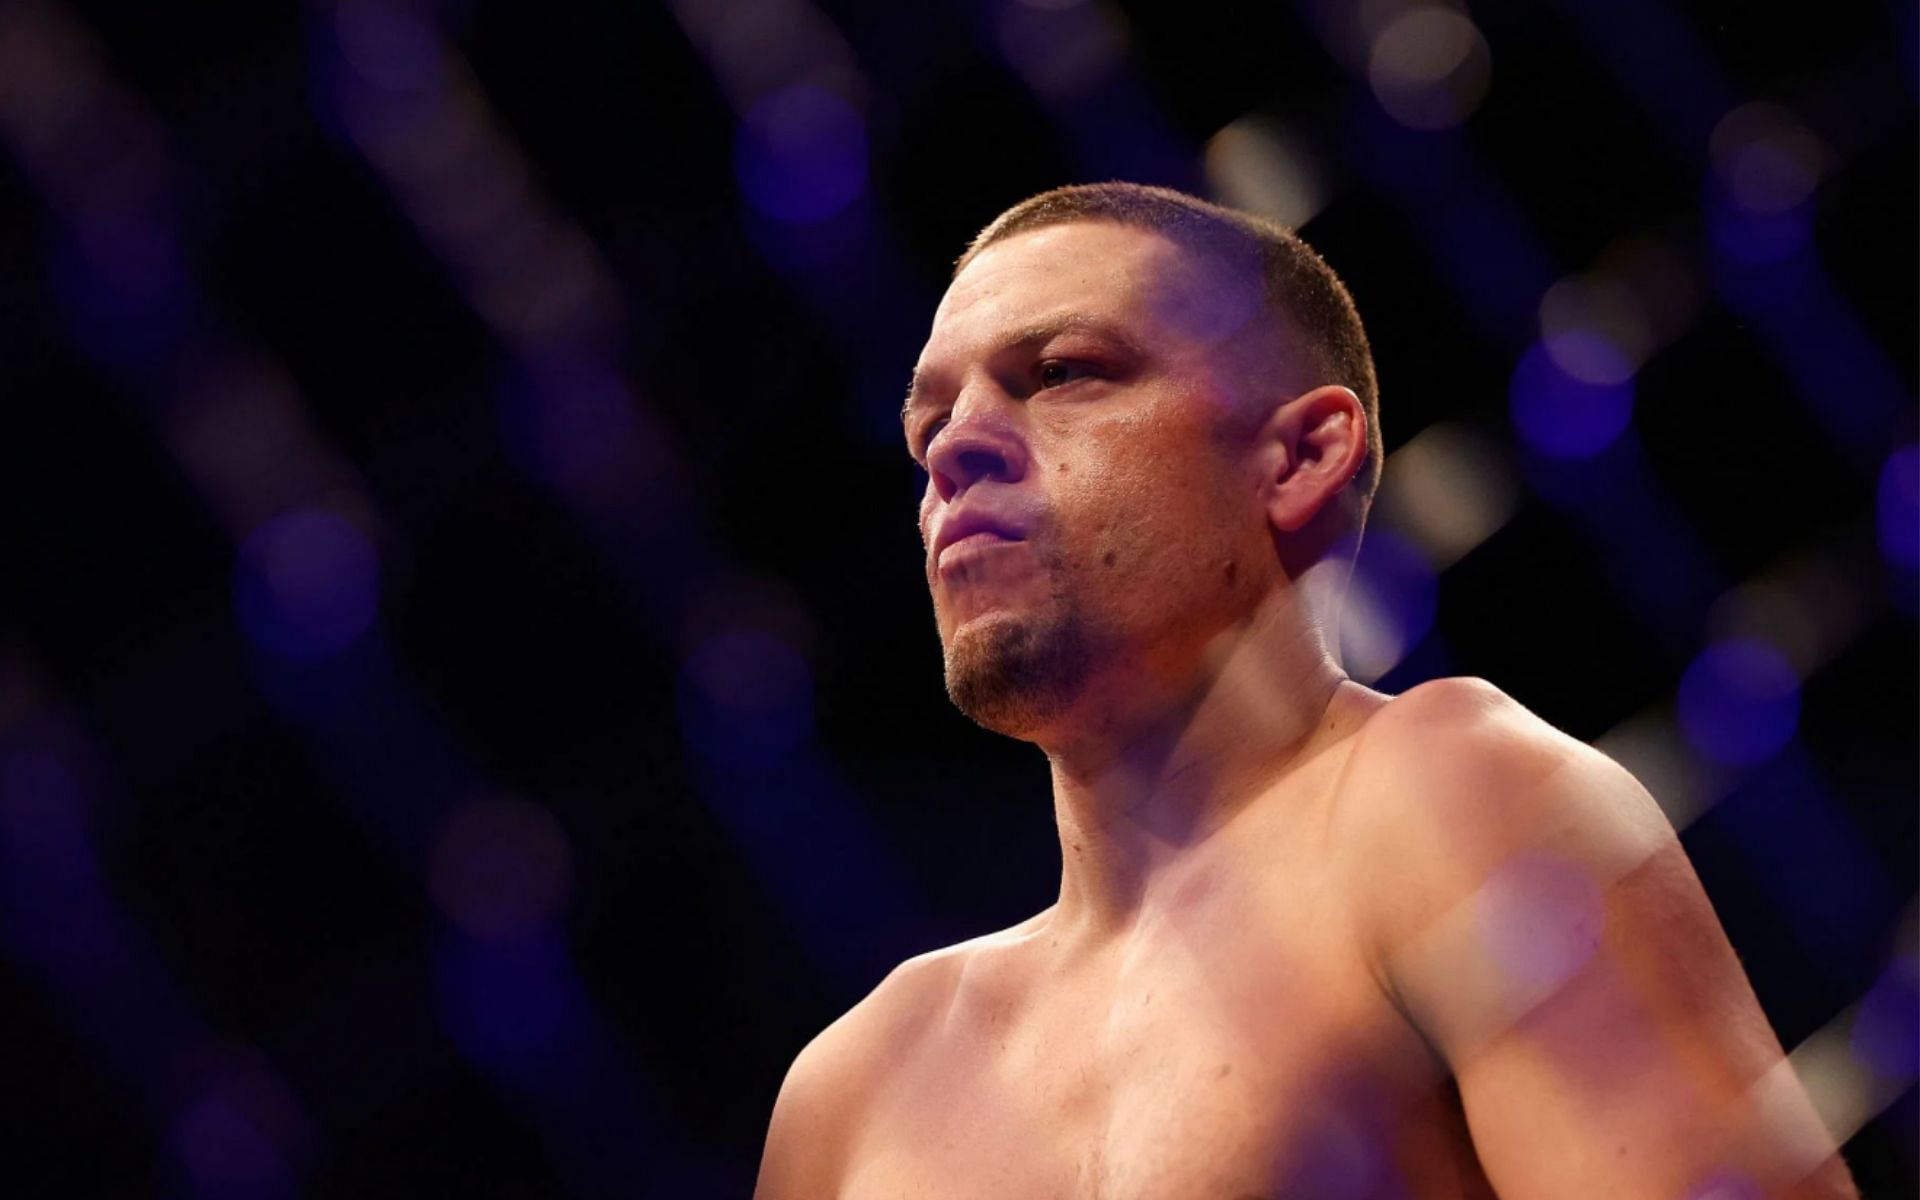 Nate Diaz asks for his release from the company